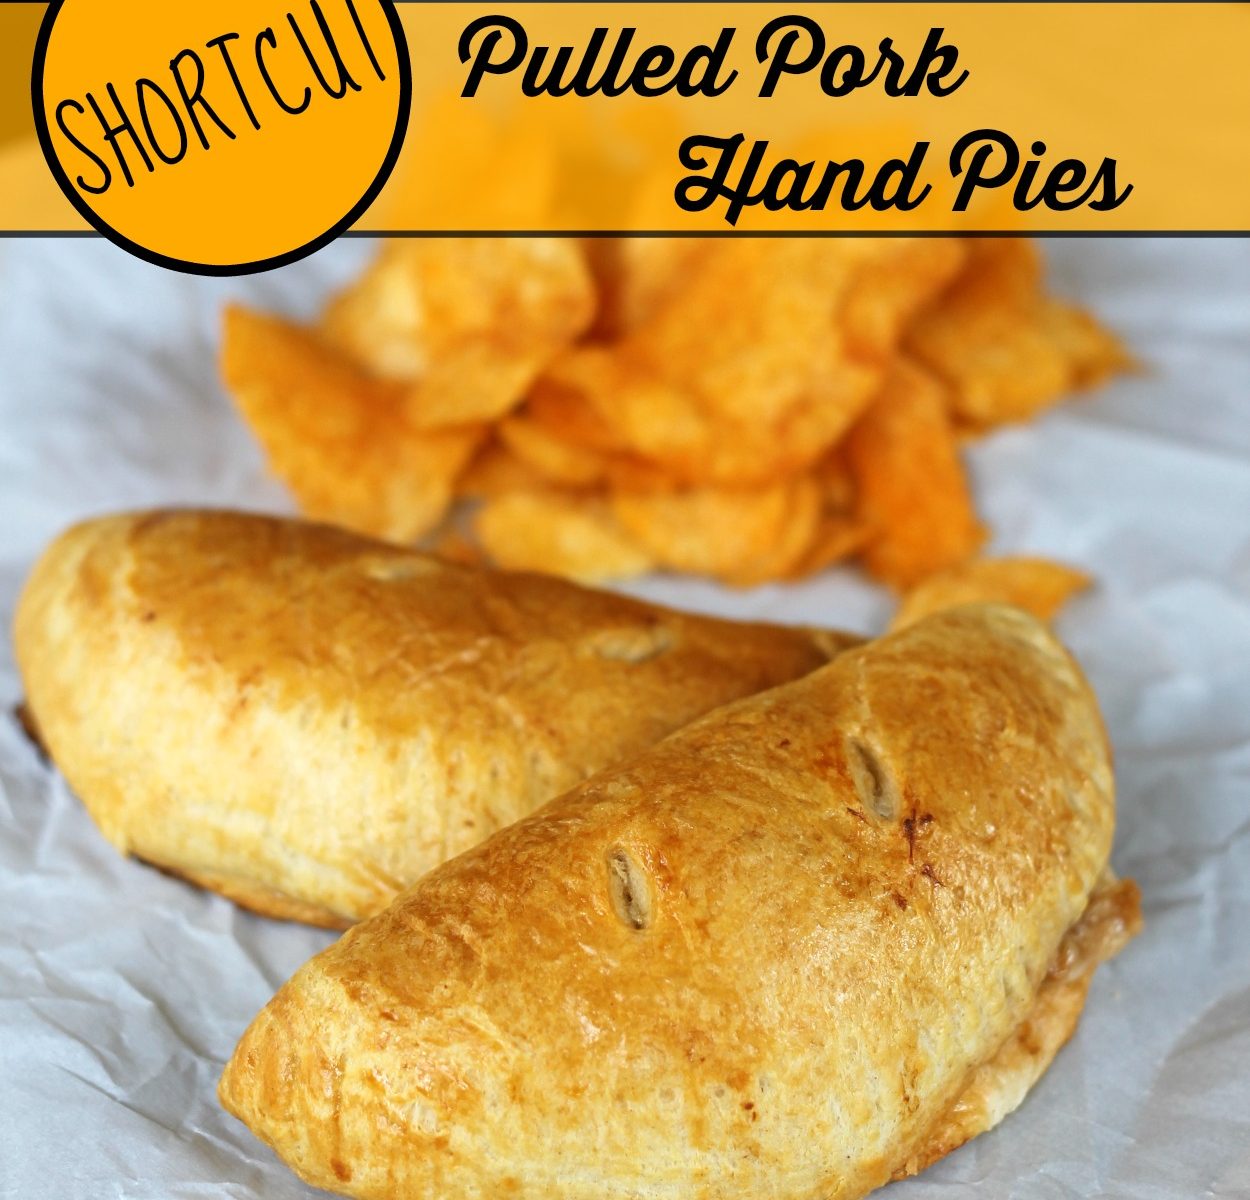 Shortcut Pulled Pork Hand Pies